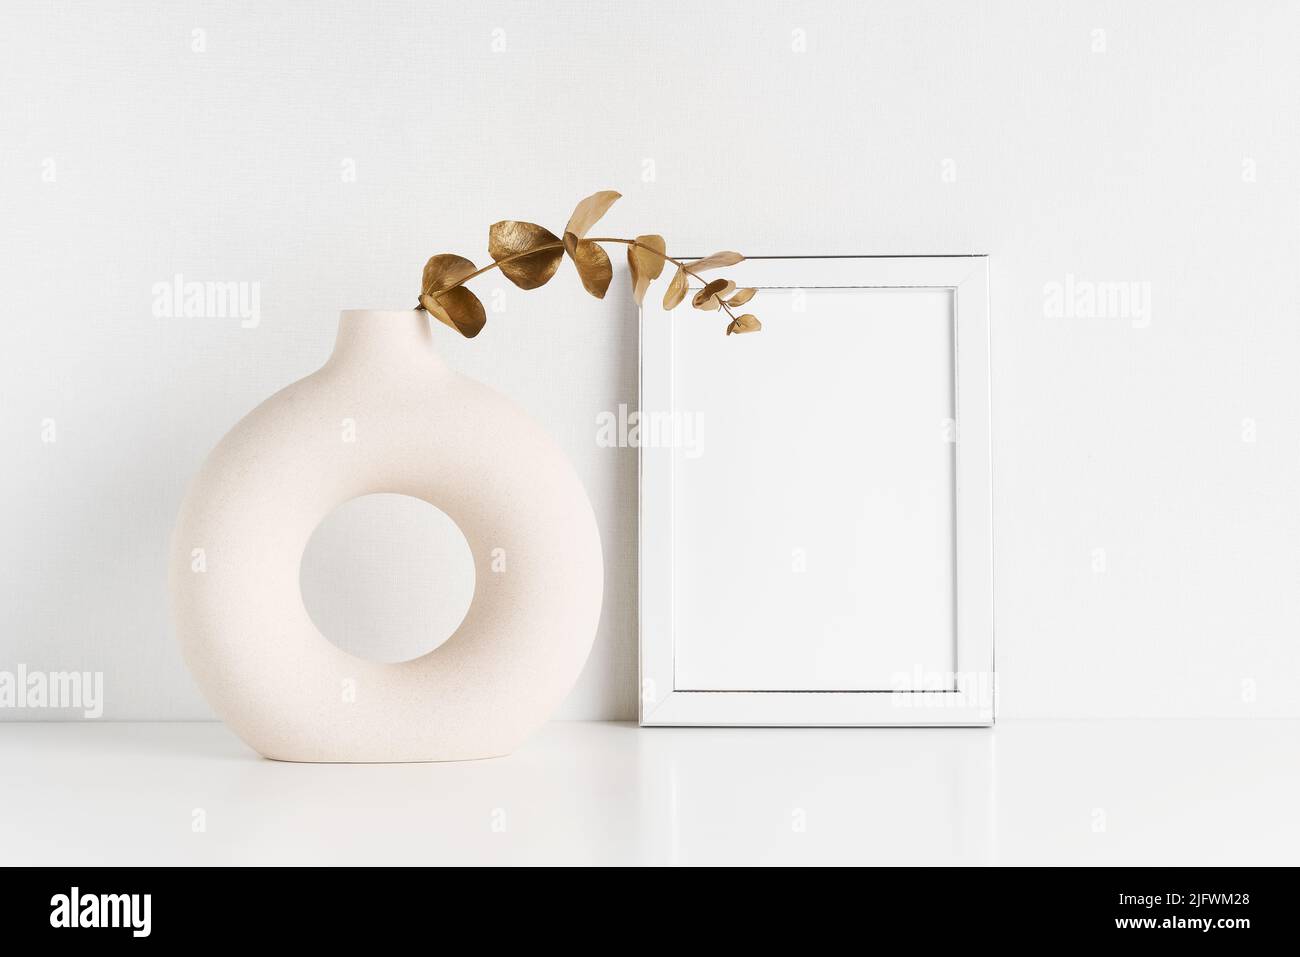 White frame mockup and round ceramic vase with a golden-colored eucalyptus branch on a white table by the wall. Copy space for text Stock Photo